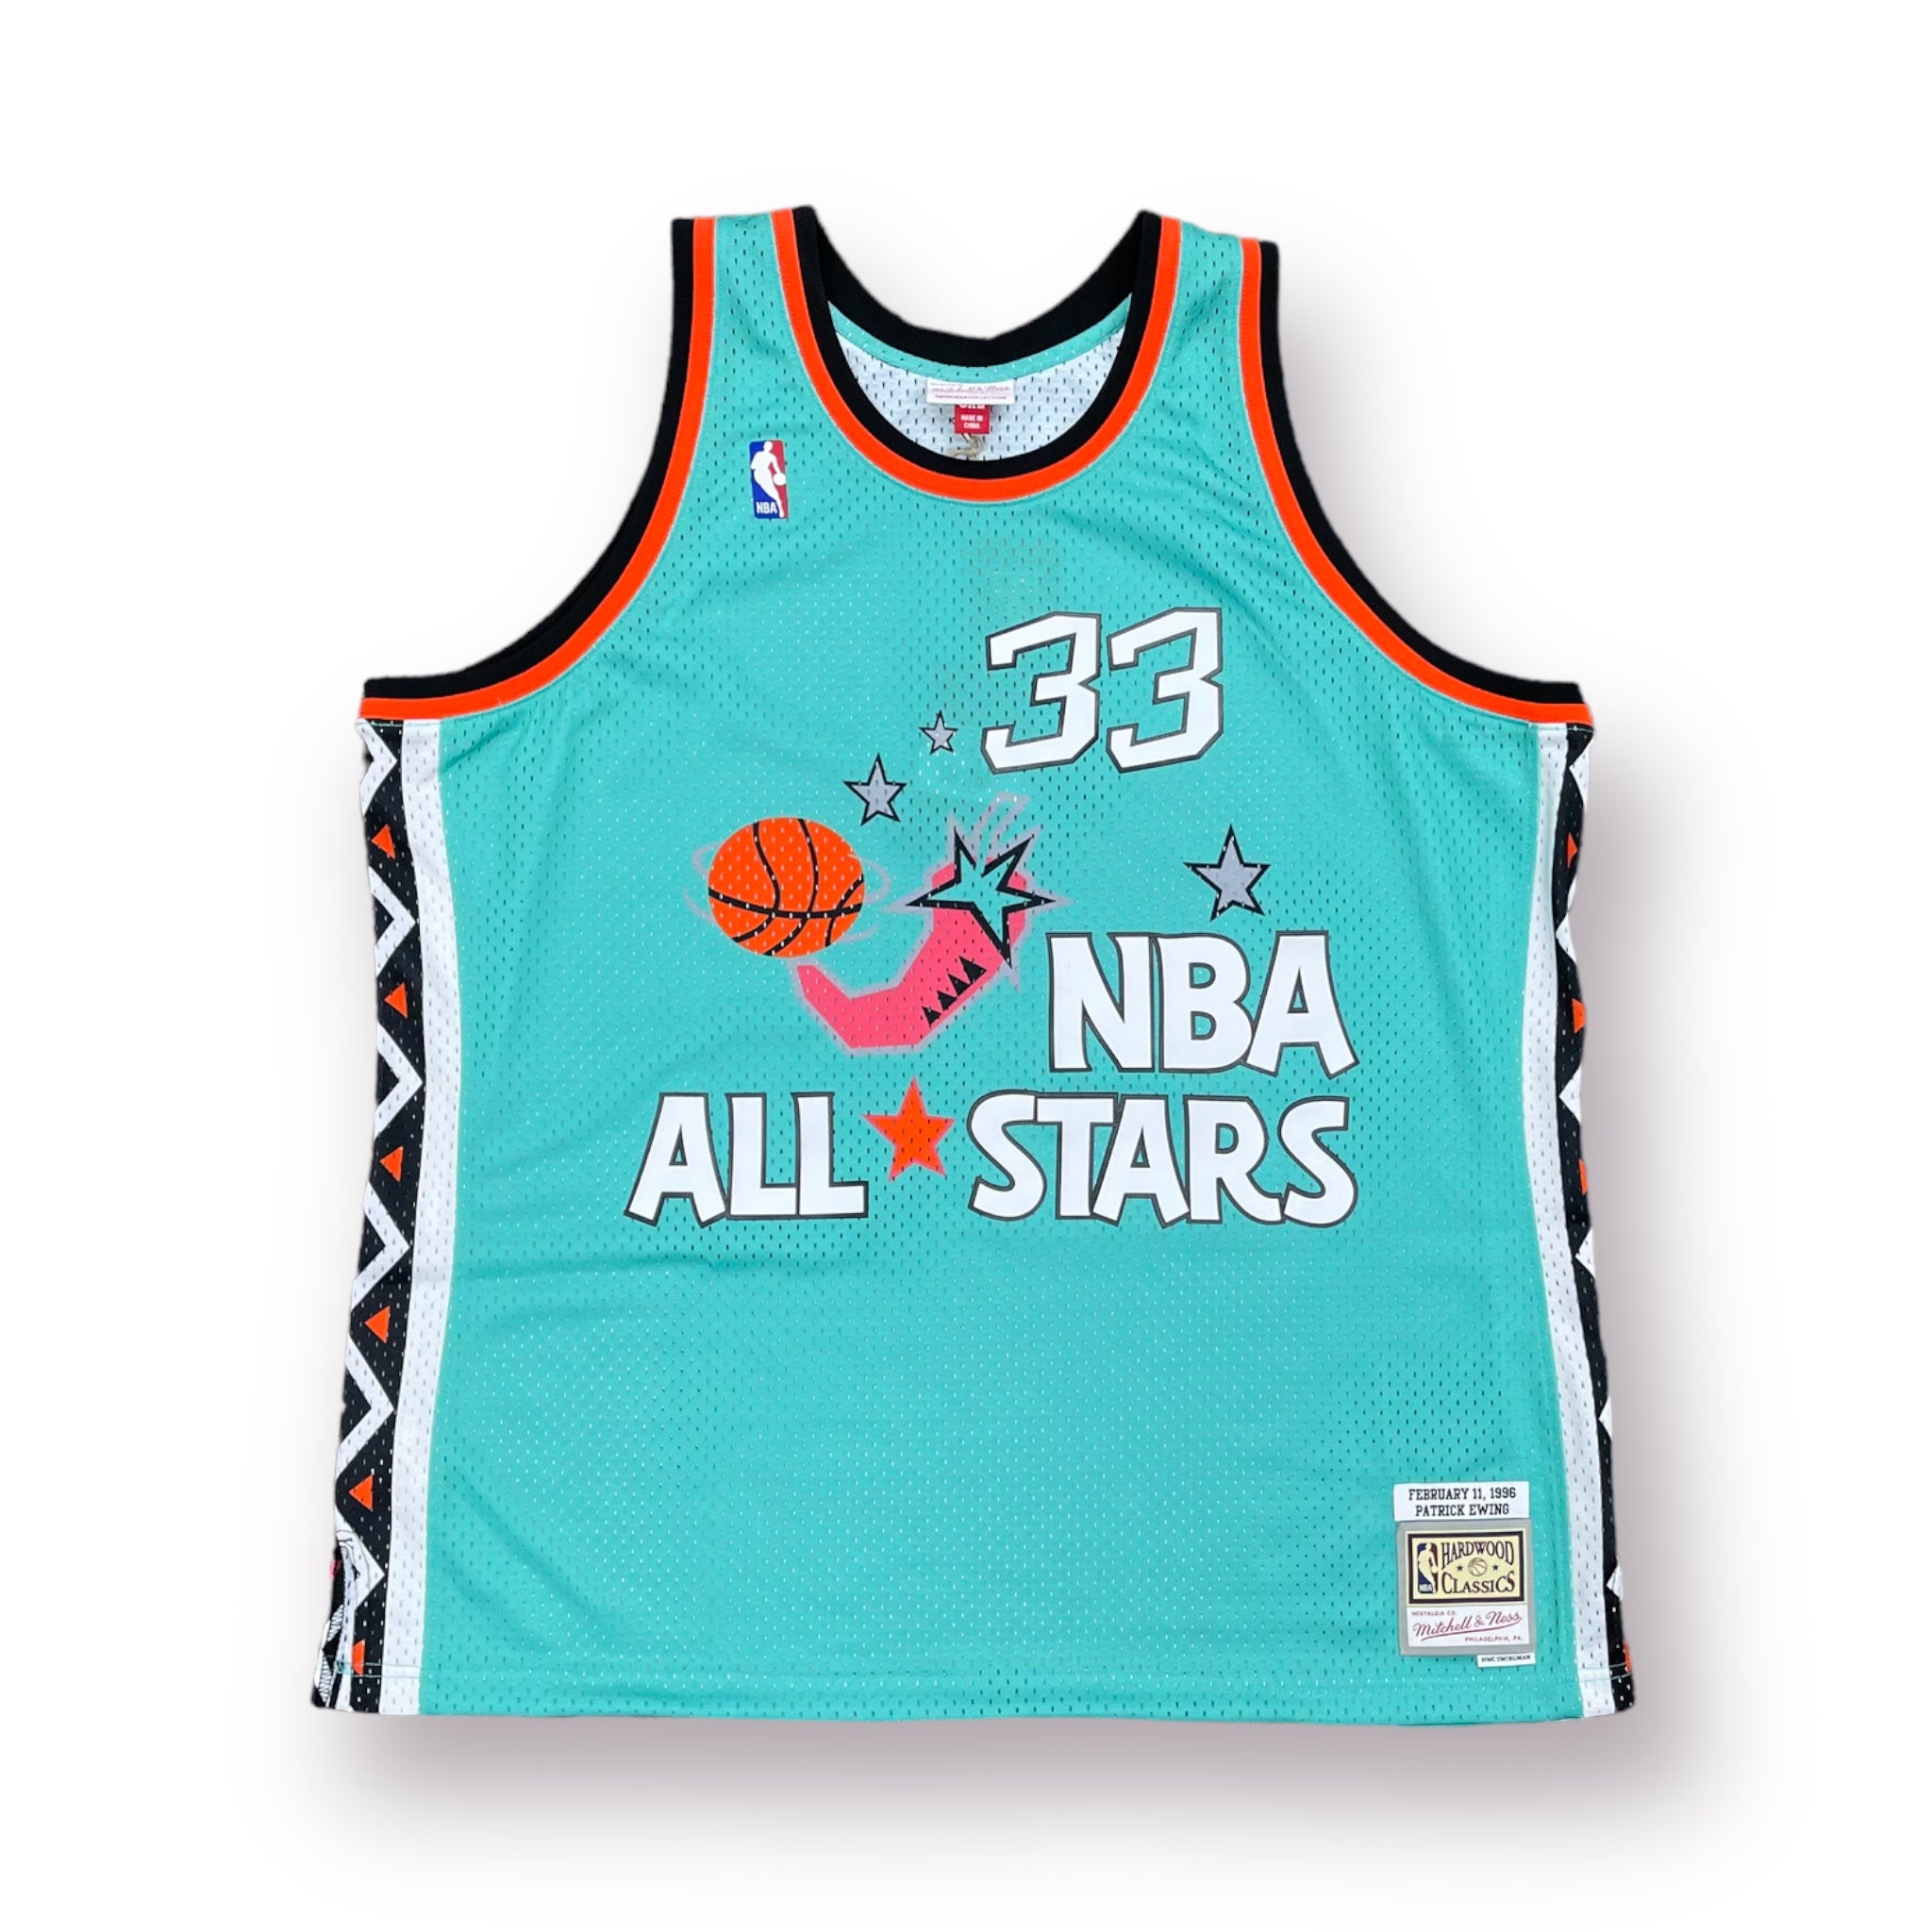 MITCHELL AND NESS 19203-PATRICK EWING ALLSTAR